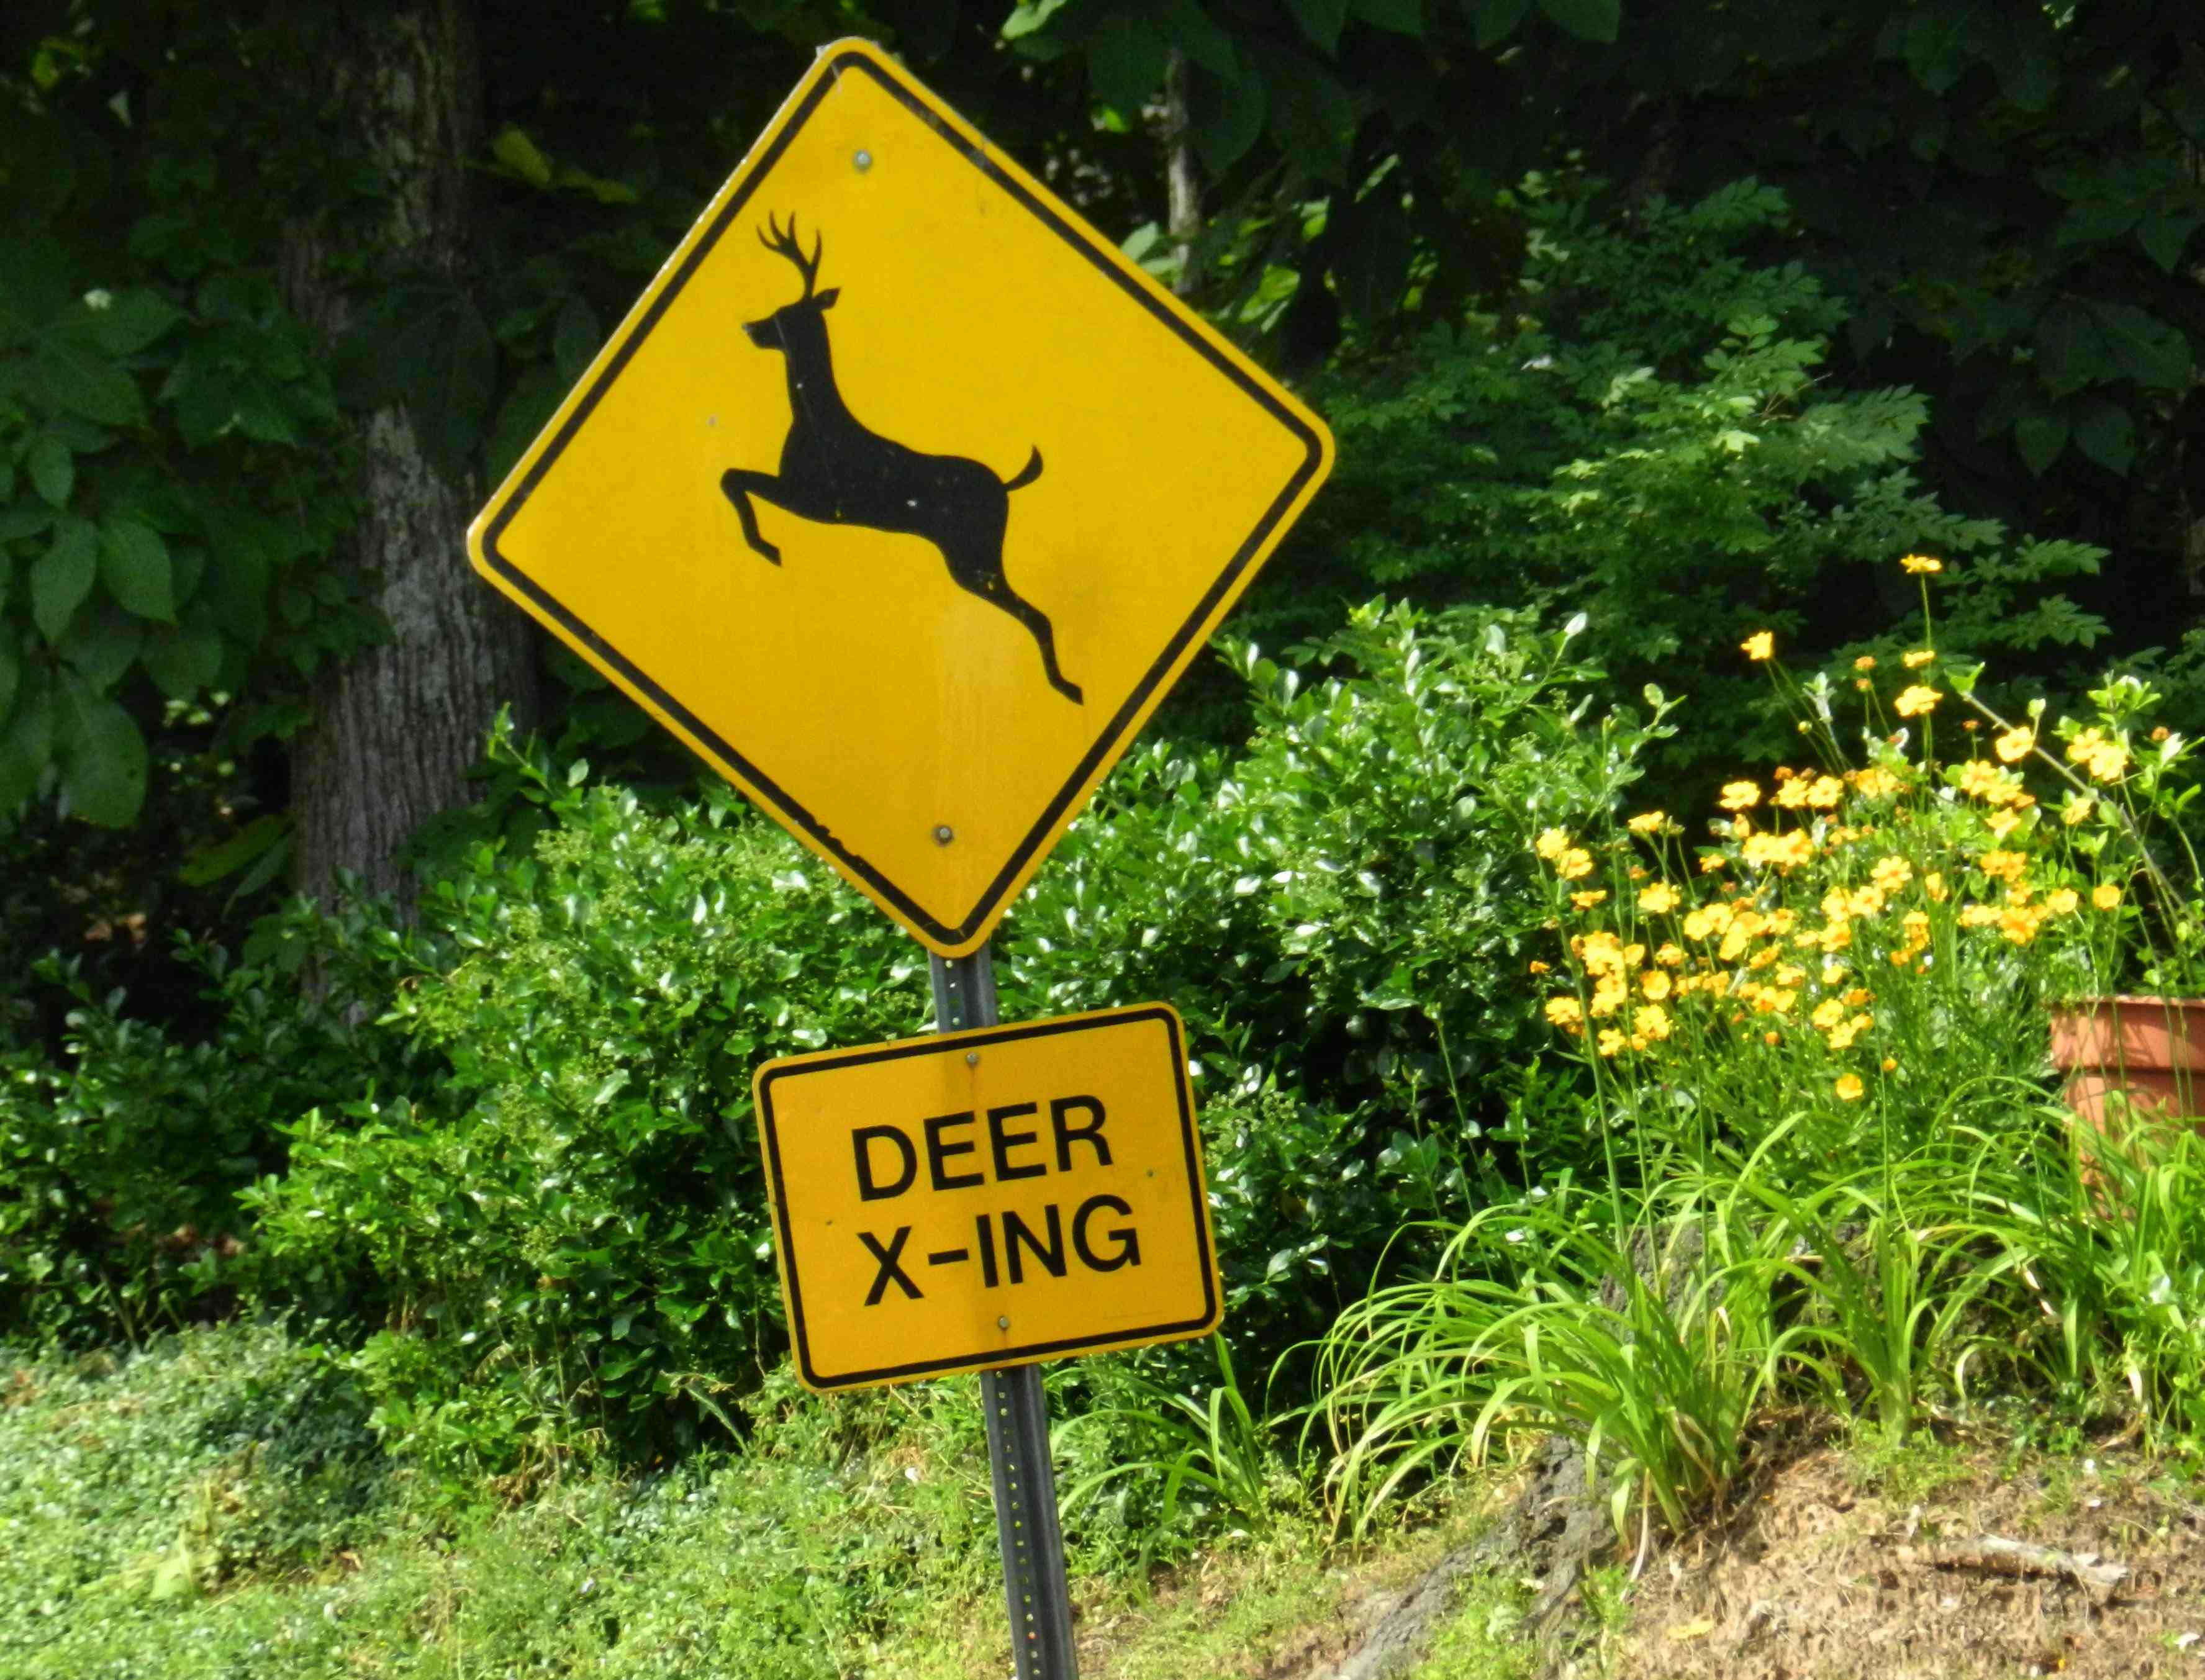 Drivers who see a deer or moose crossing sign should be extra alert and slow down.